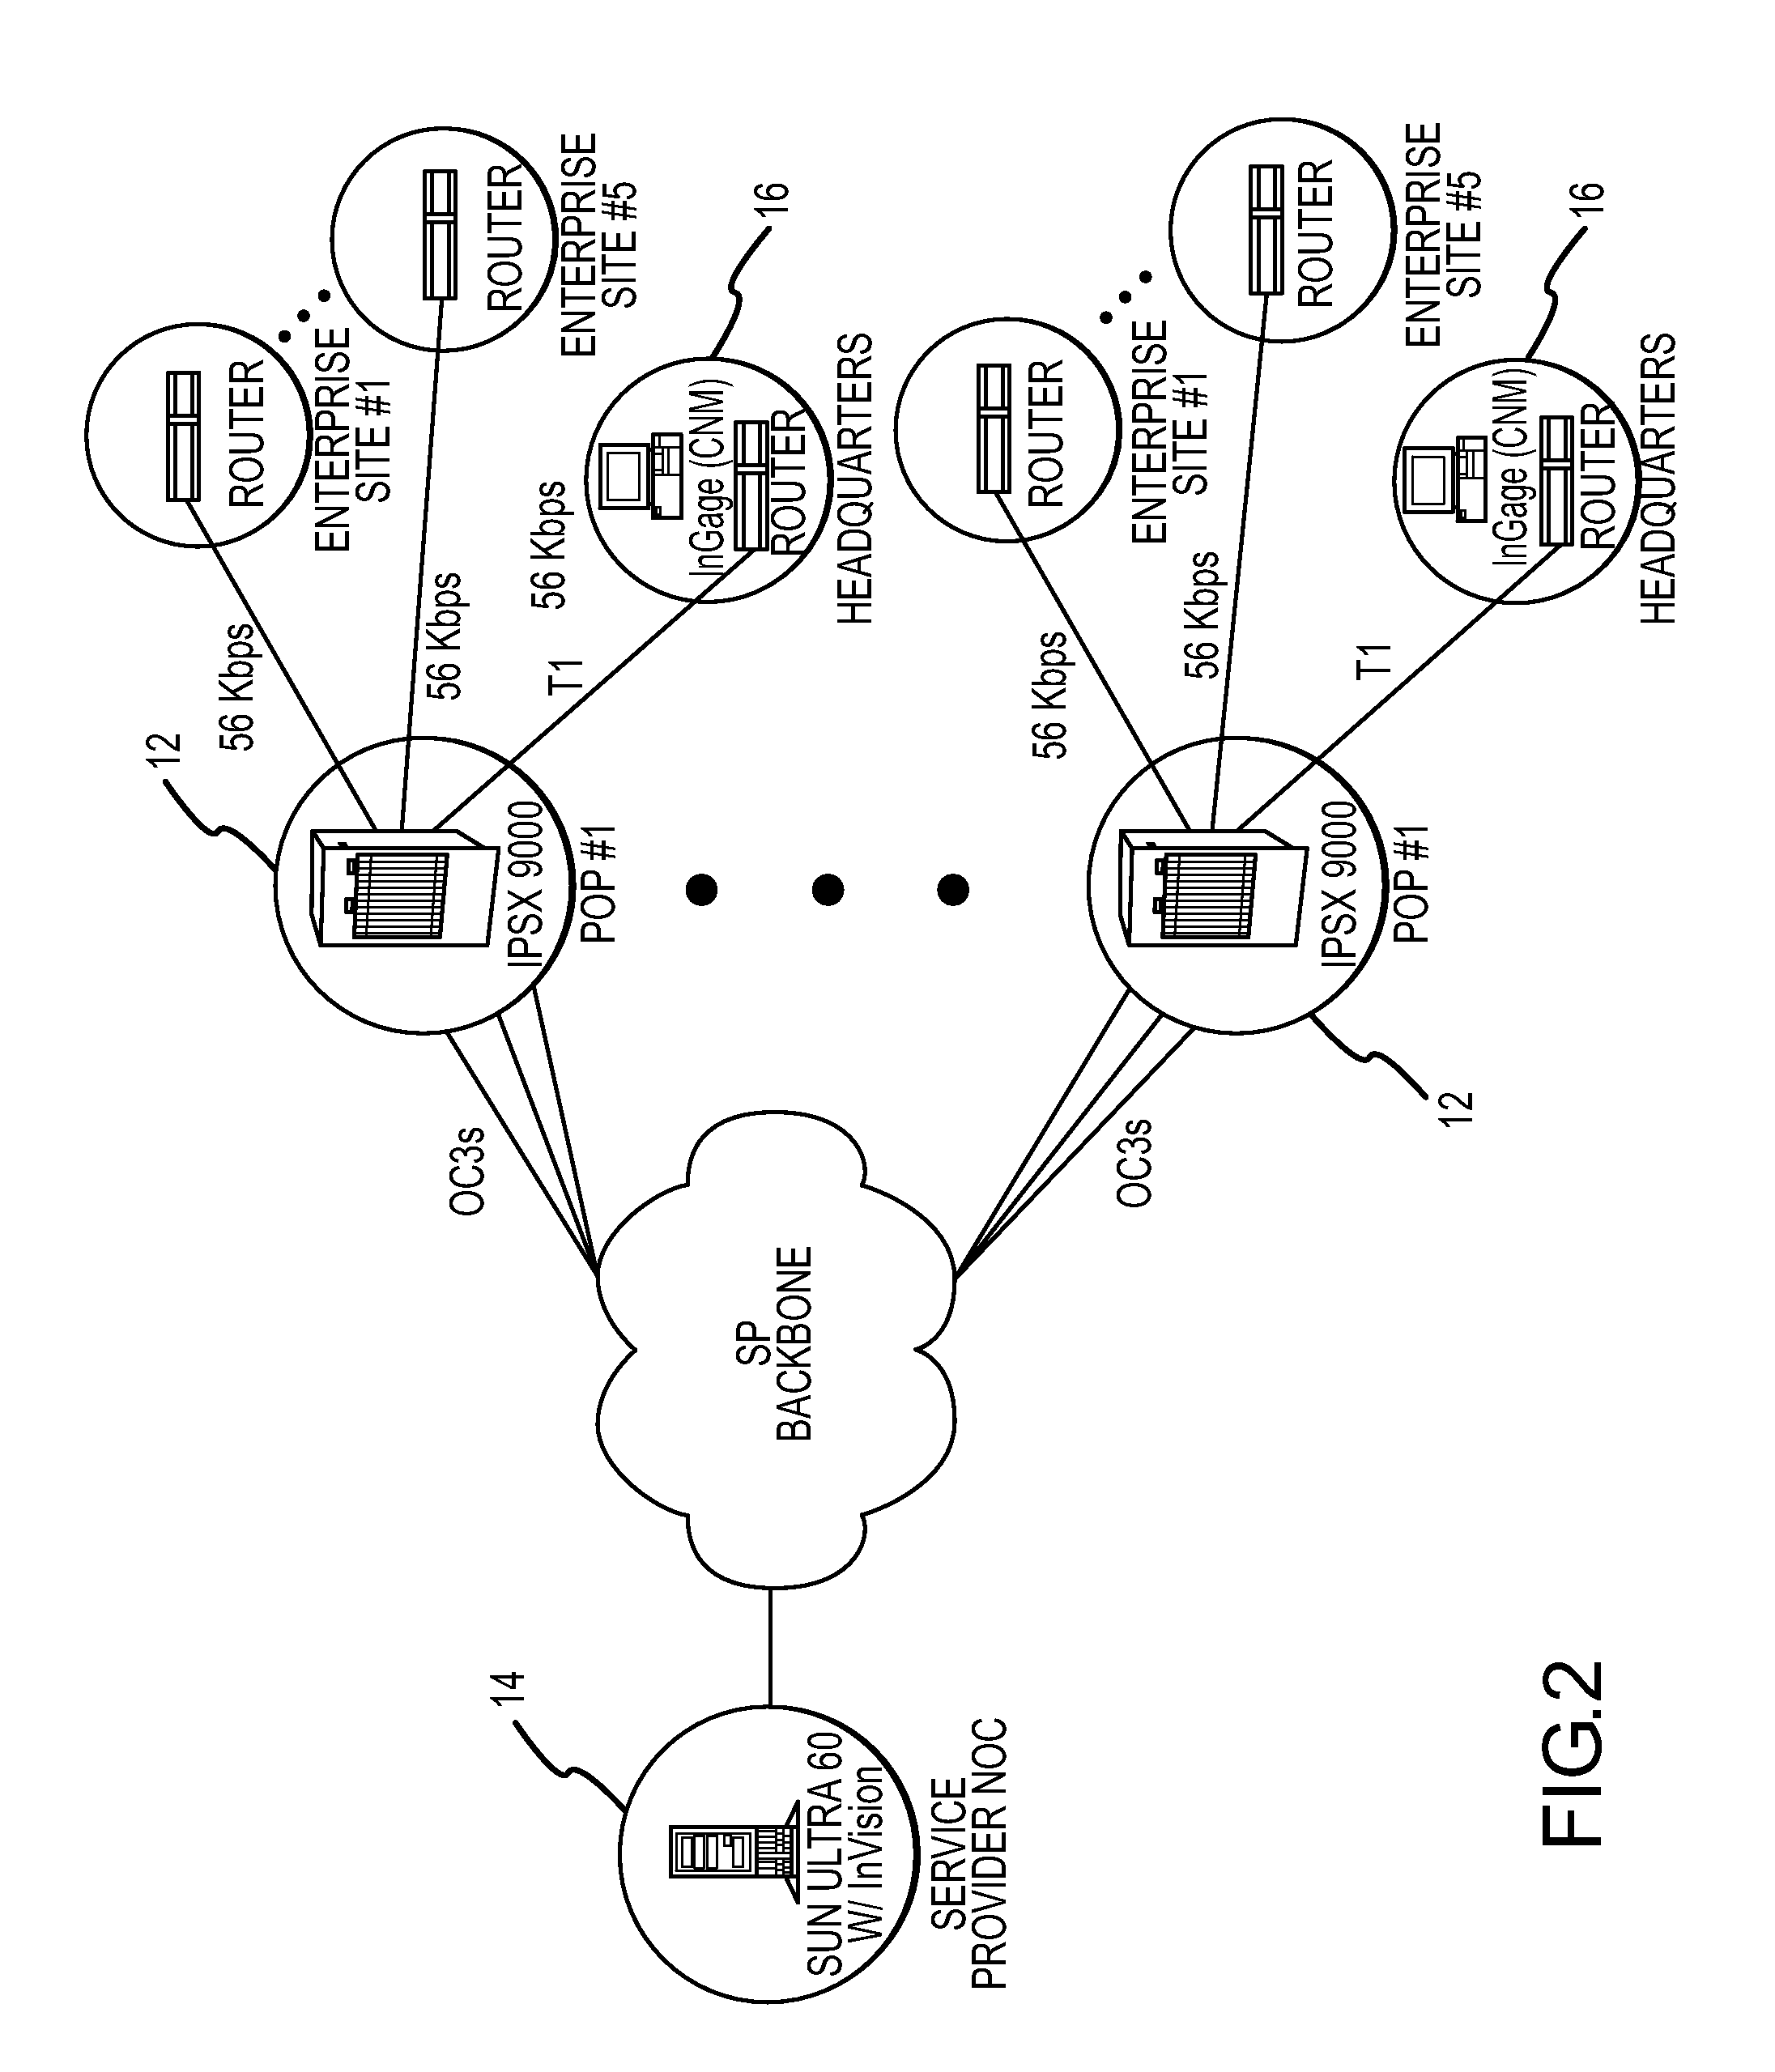 Switch management system and method